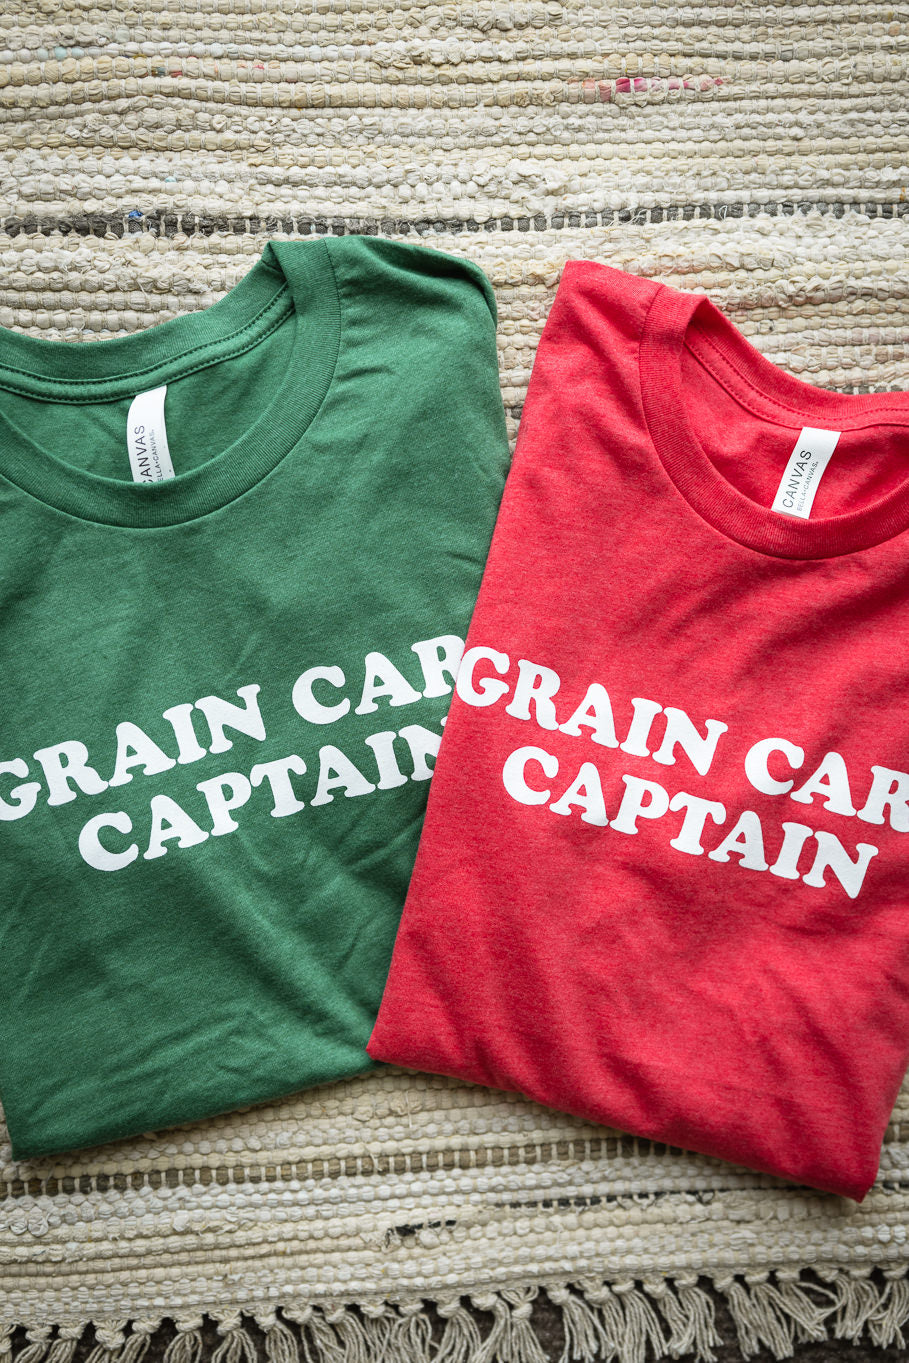 Grain Cart Captain Graphic Tee in Heather Grass Green | Sizes S - 3XL